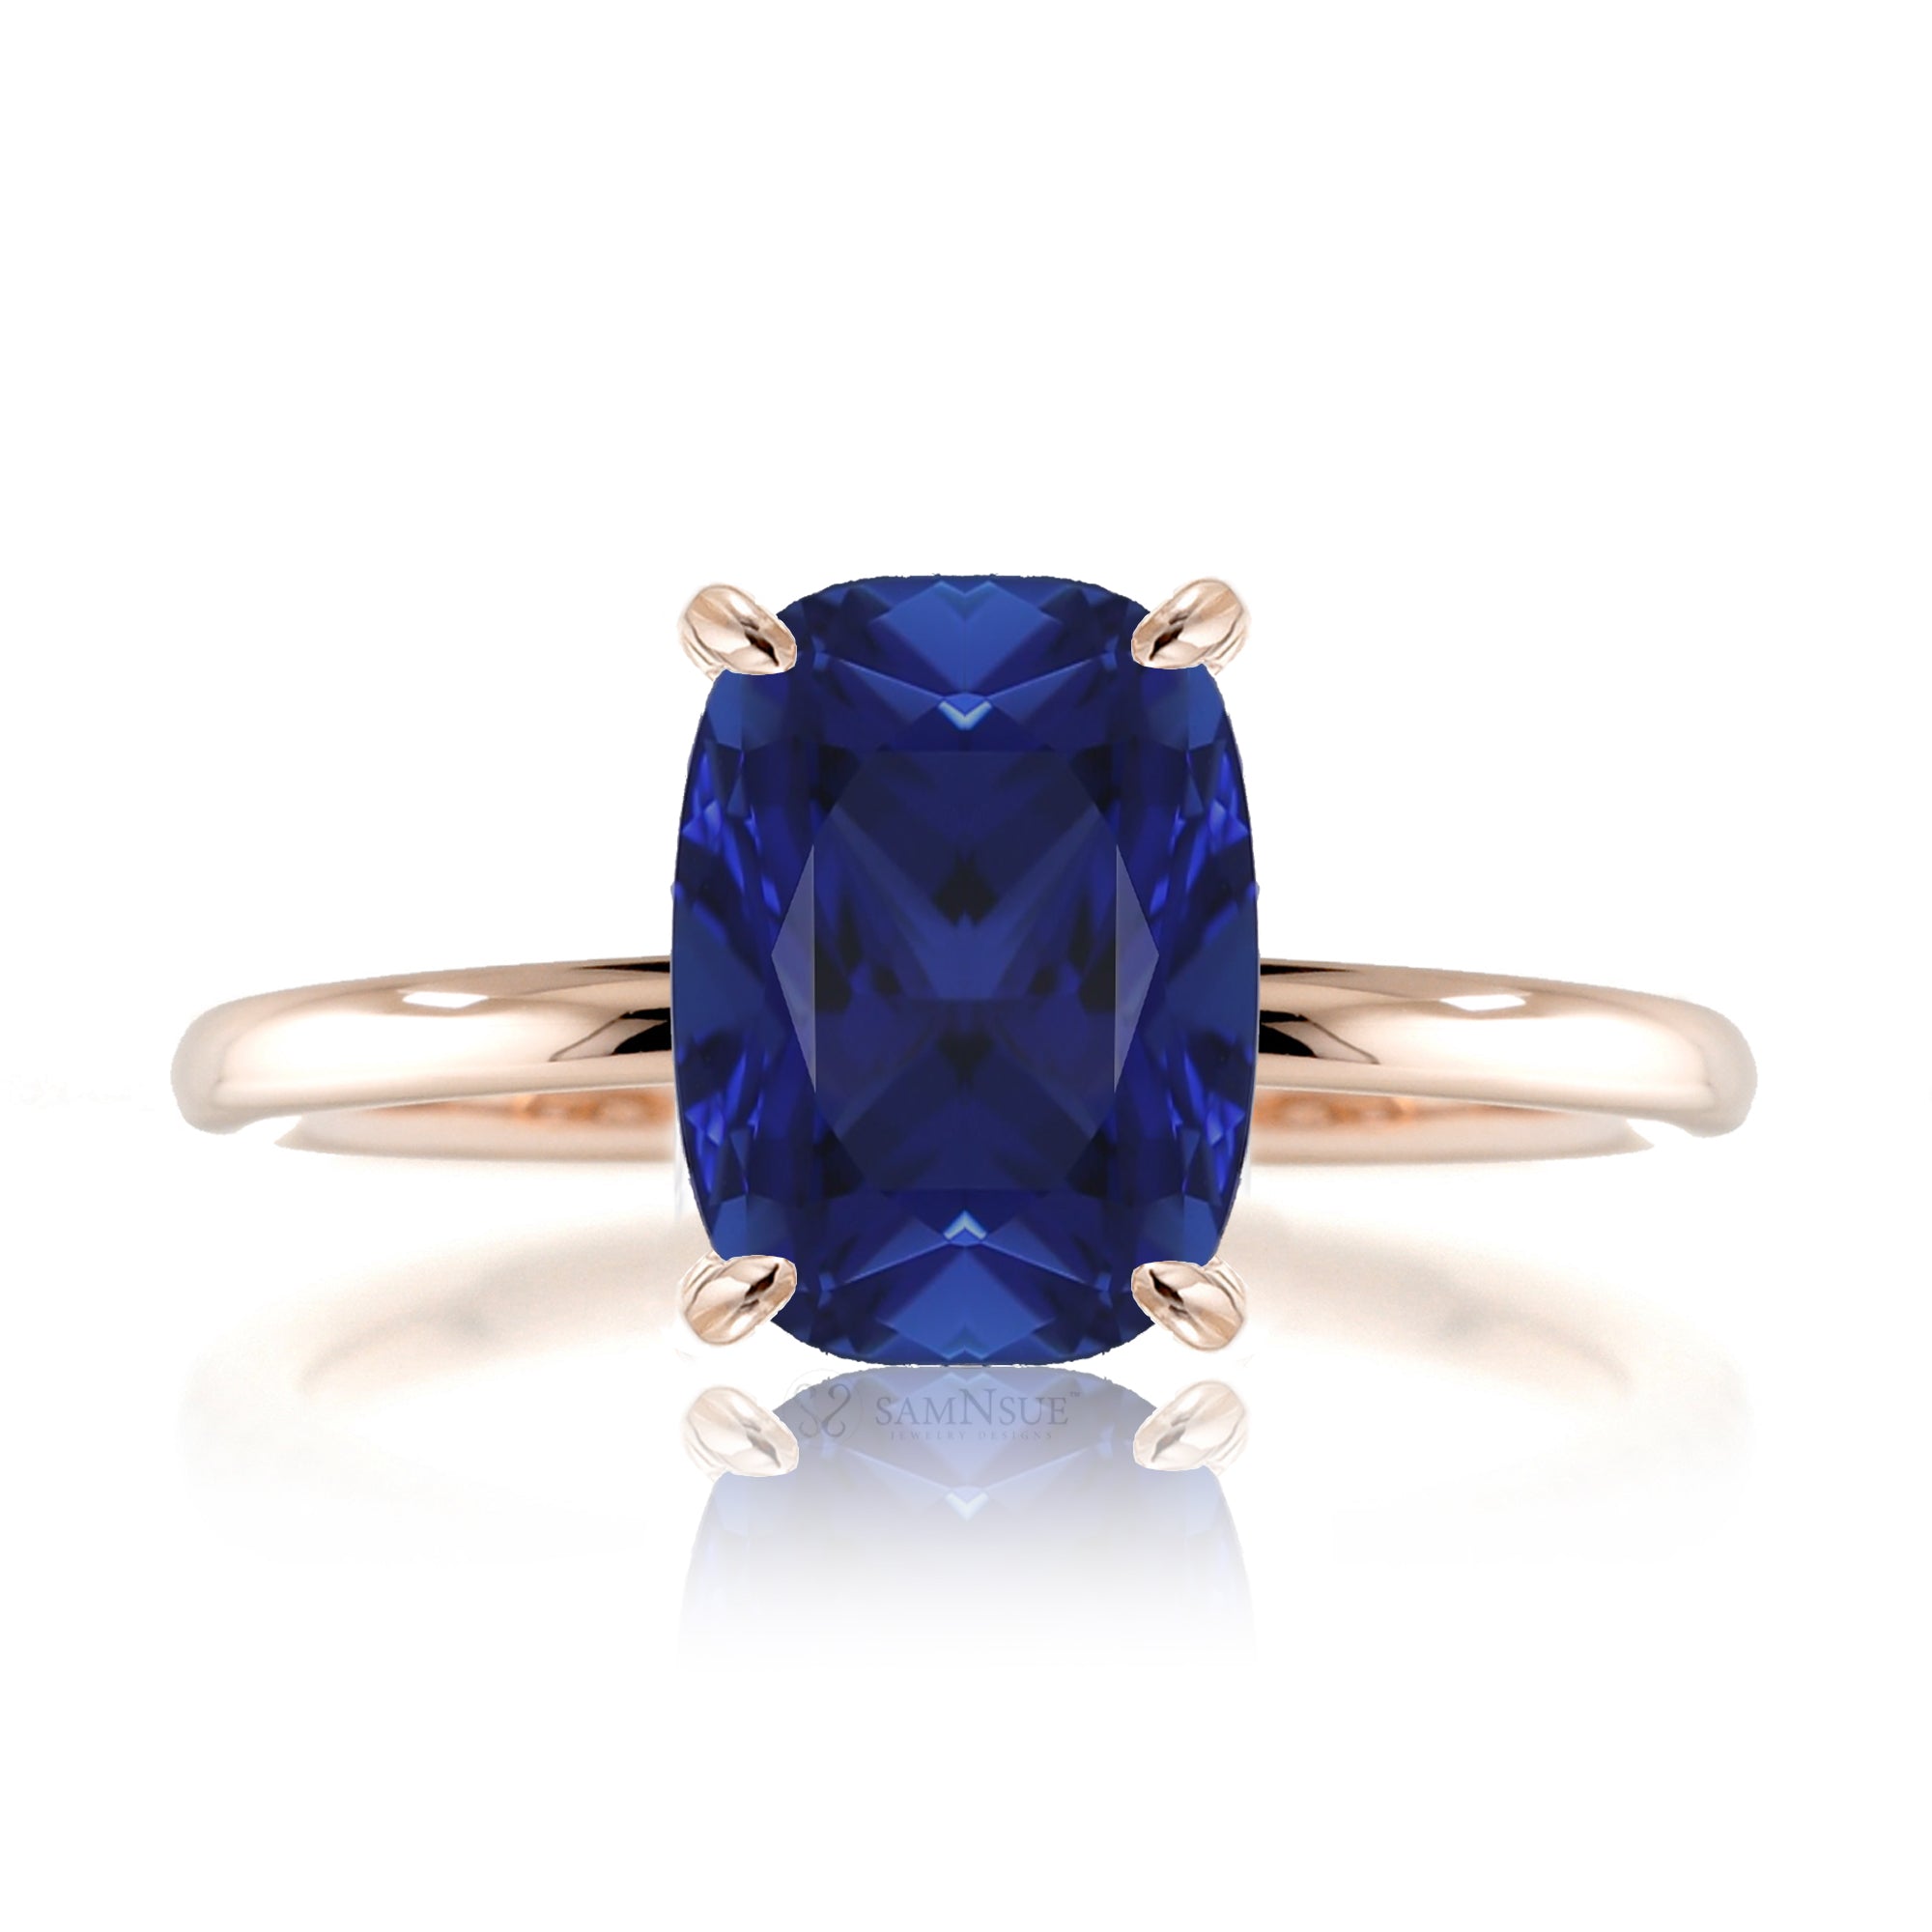 Cushion cut blue sapphire solid band engagement ring rose gold - the Ava